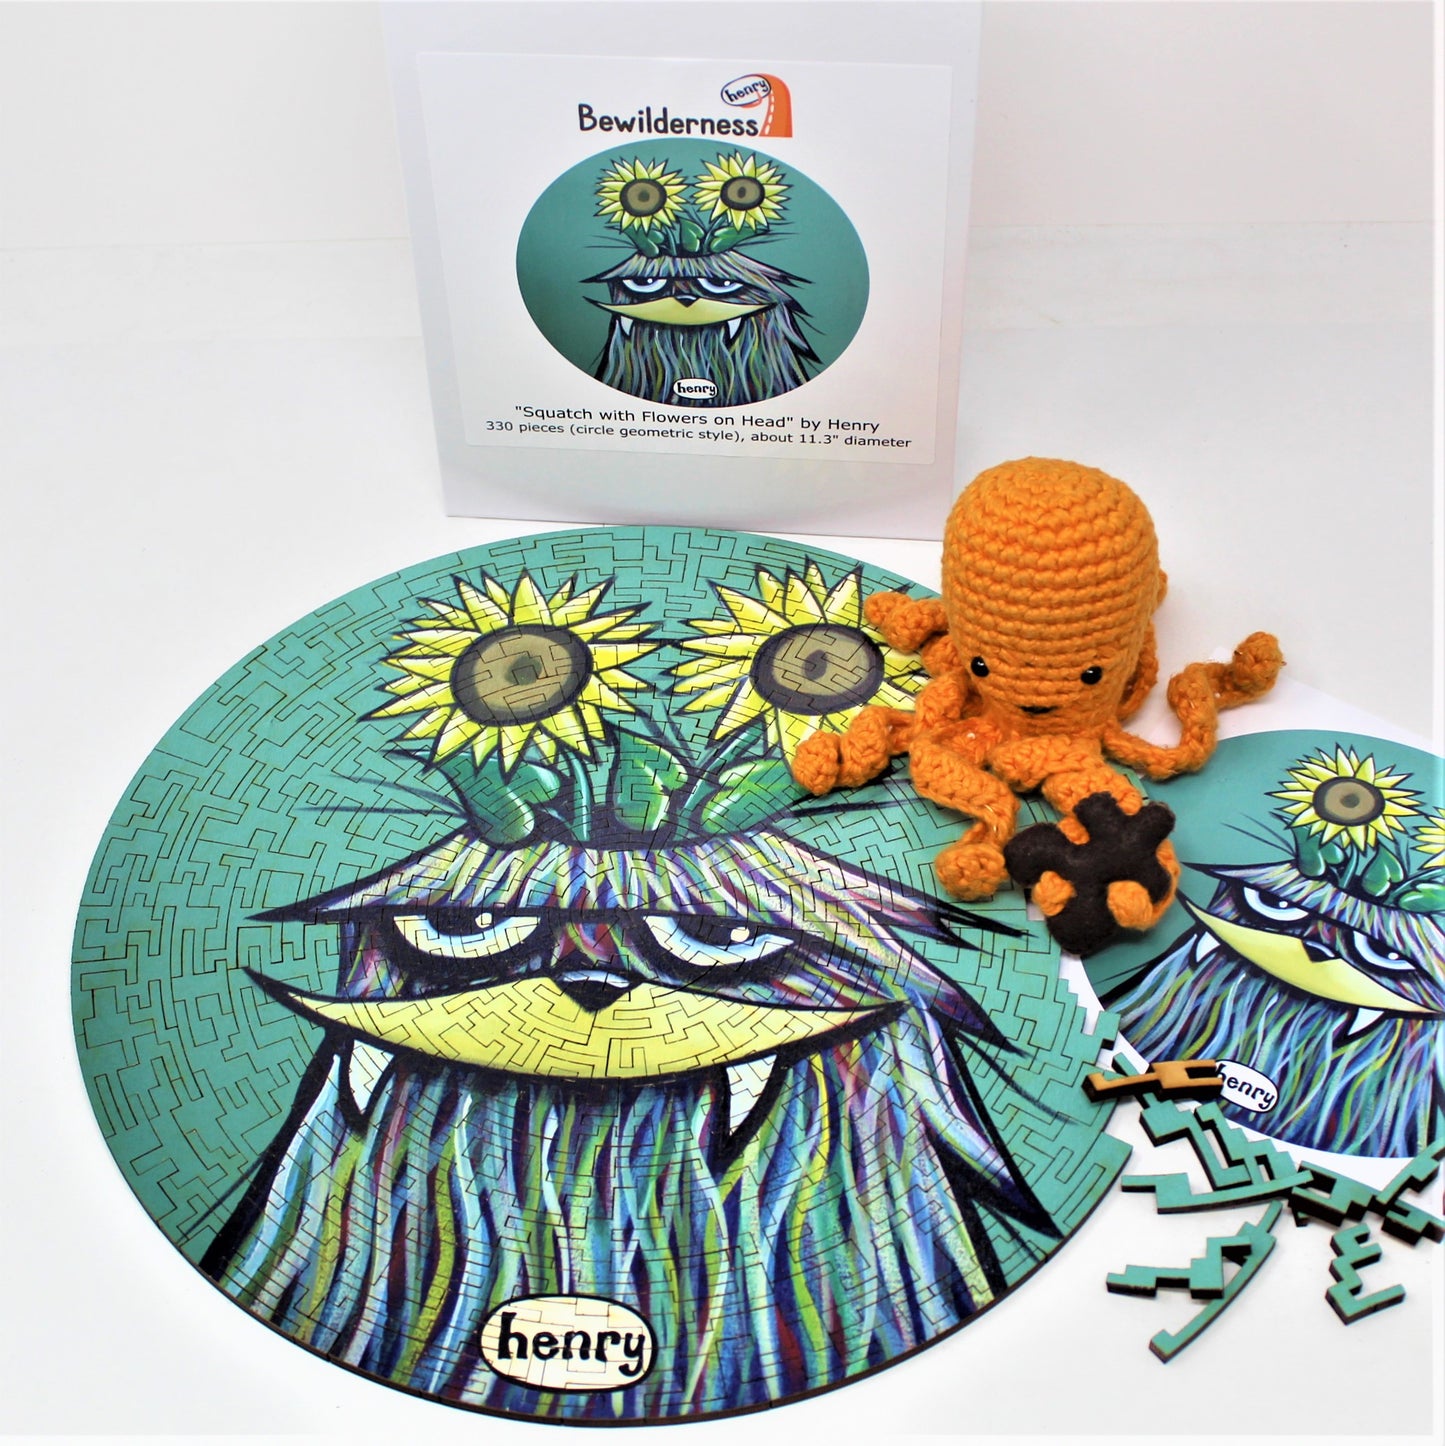 Sasquatch with Flowers in Head 330 Piece Round Geometric Puzzle Featuring the Art of Henry